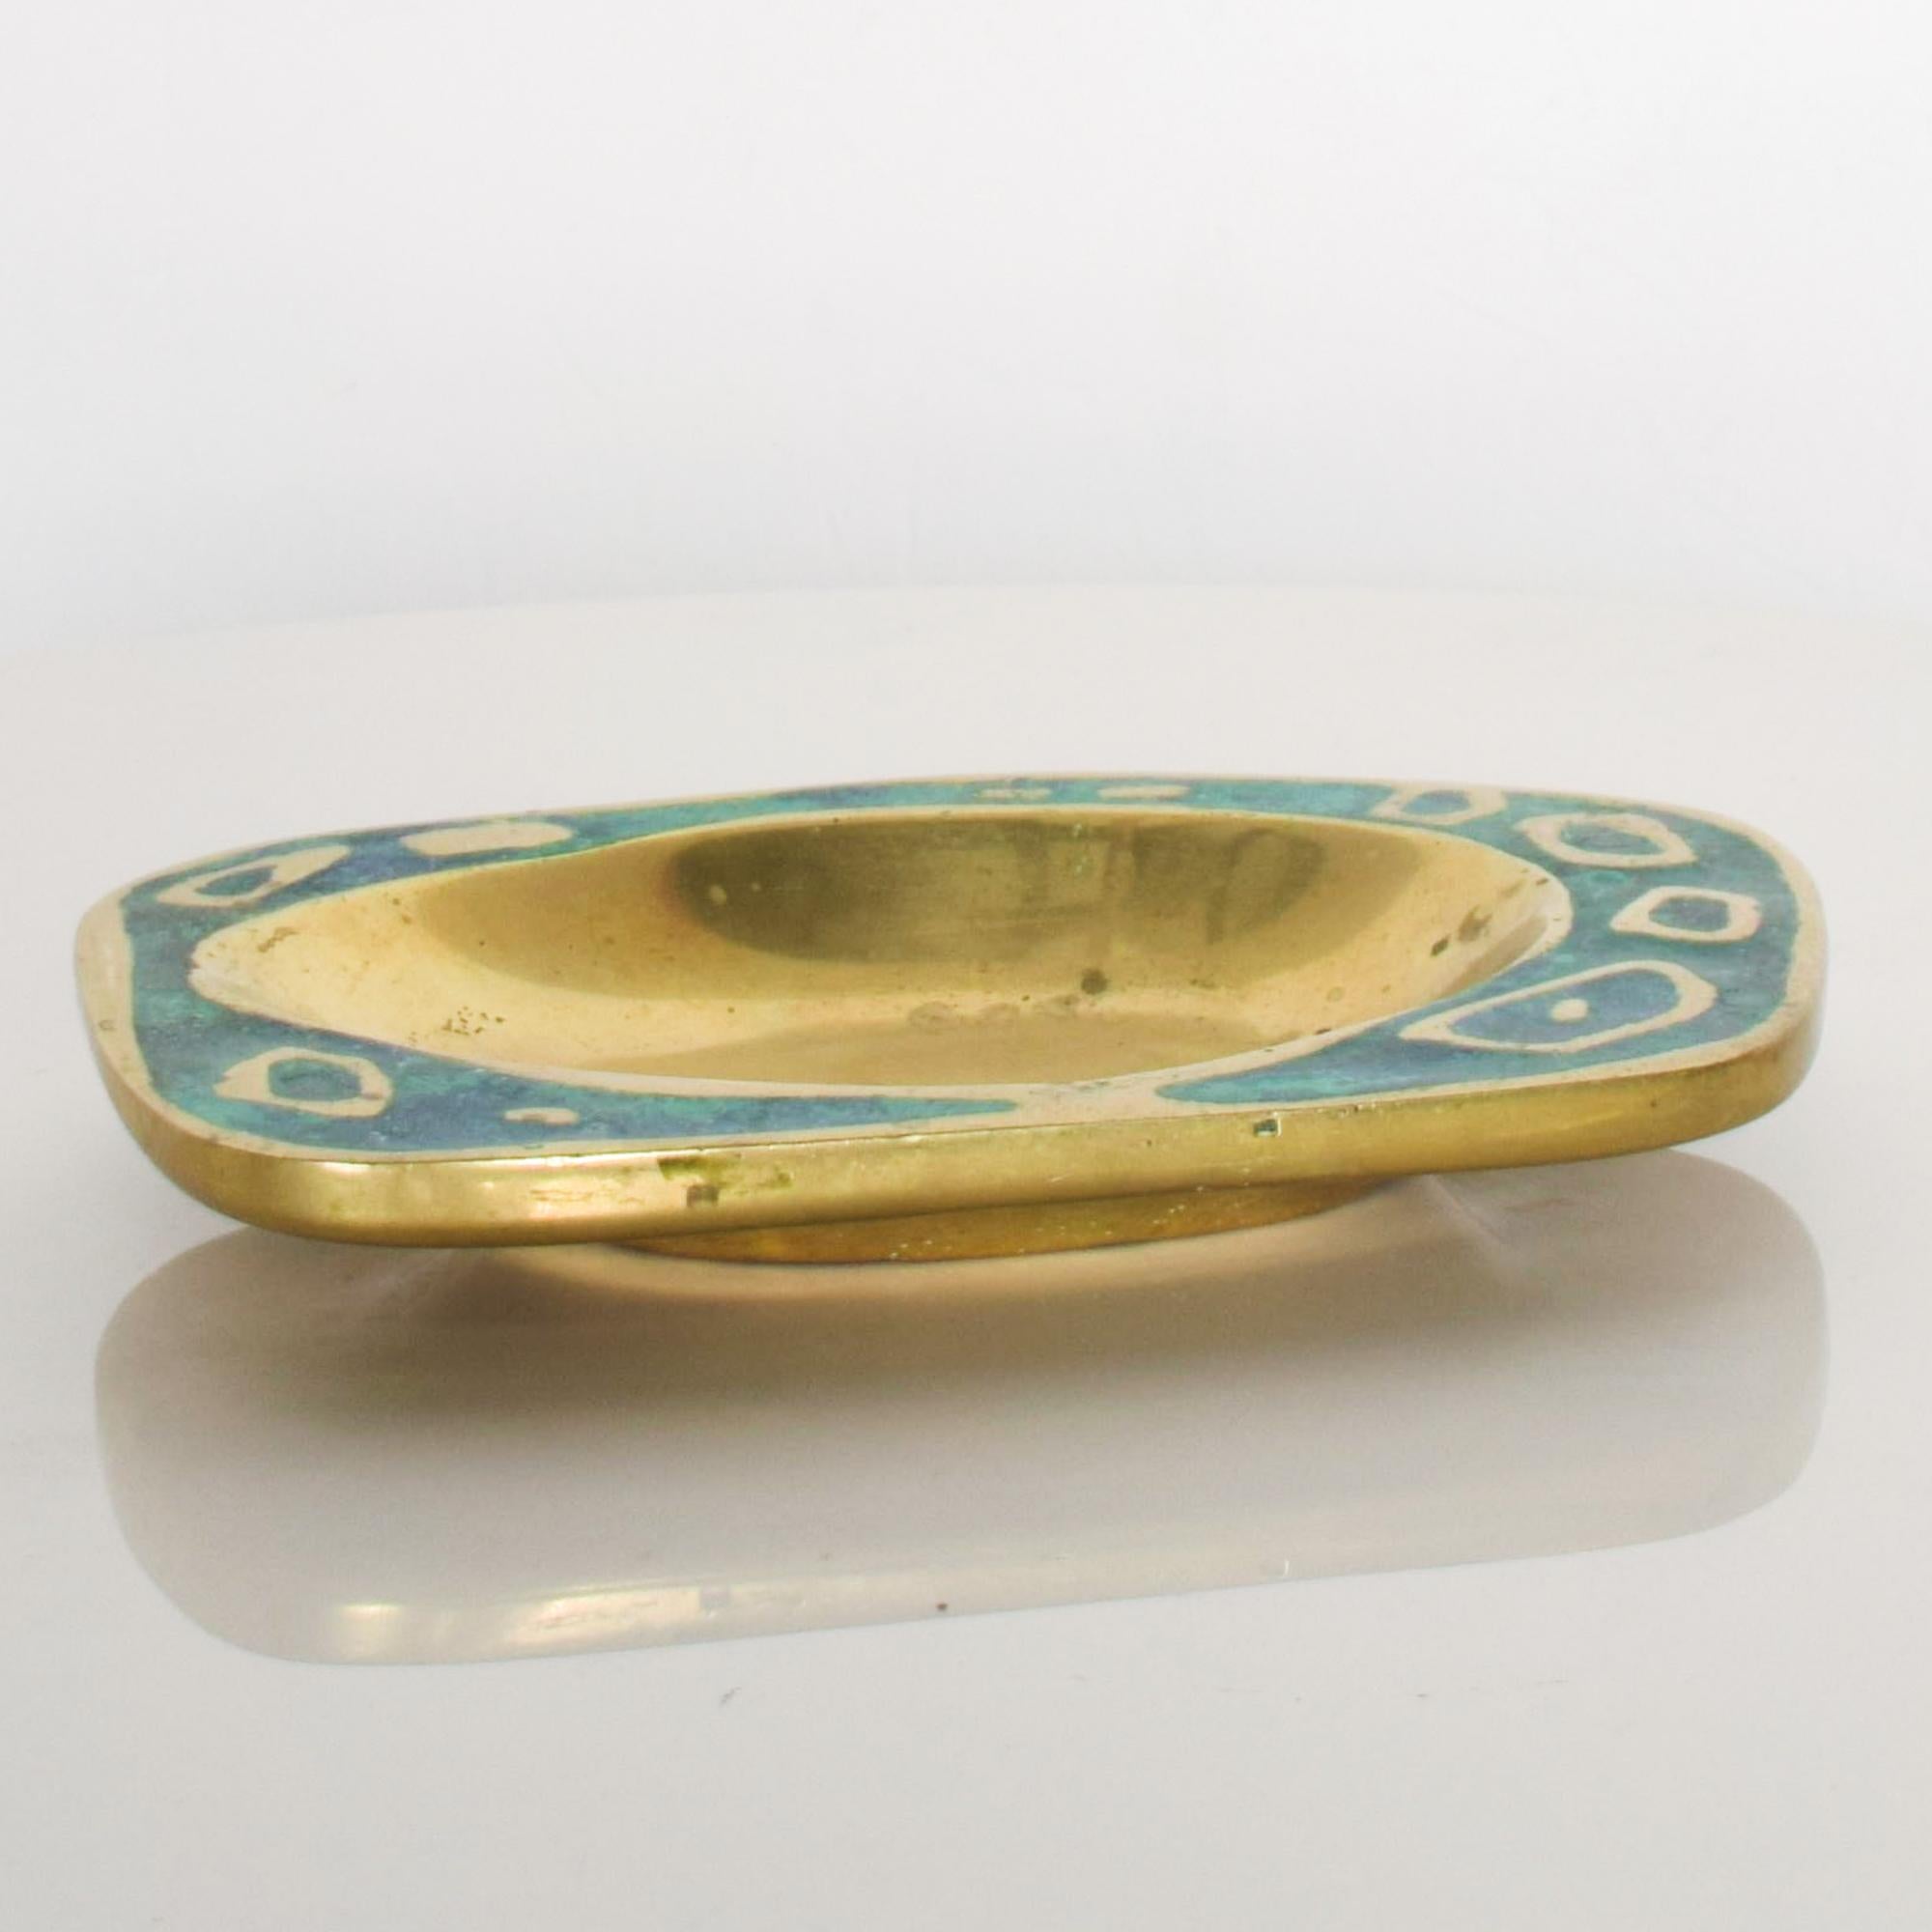 Pepe Mendoza eye catching turquoise malachite brass gold dish -fabulous shiny decorative display.
Mid-Century Modernist design with a freeform brass body and inlaid genuine malachite. Maker stamped.
Use as tray dish bowl trinket catch all- many